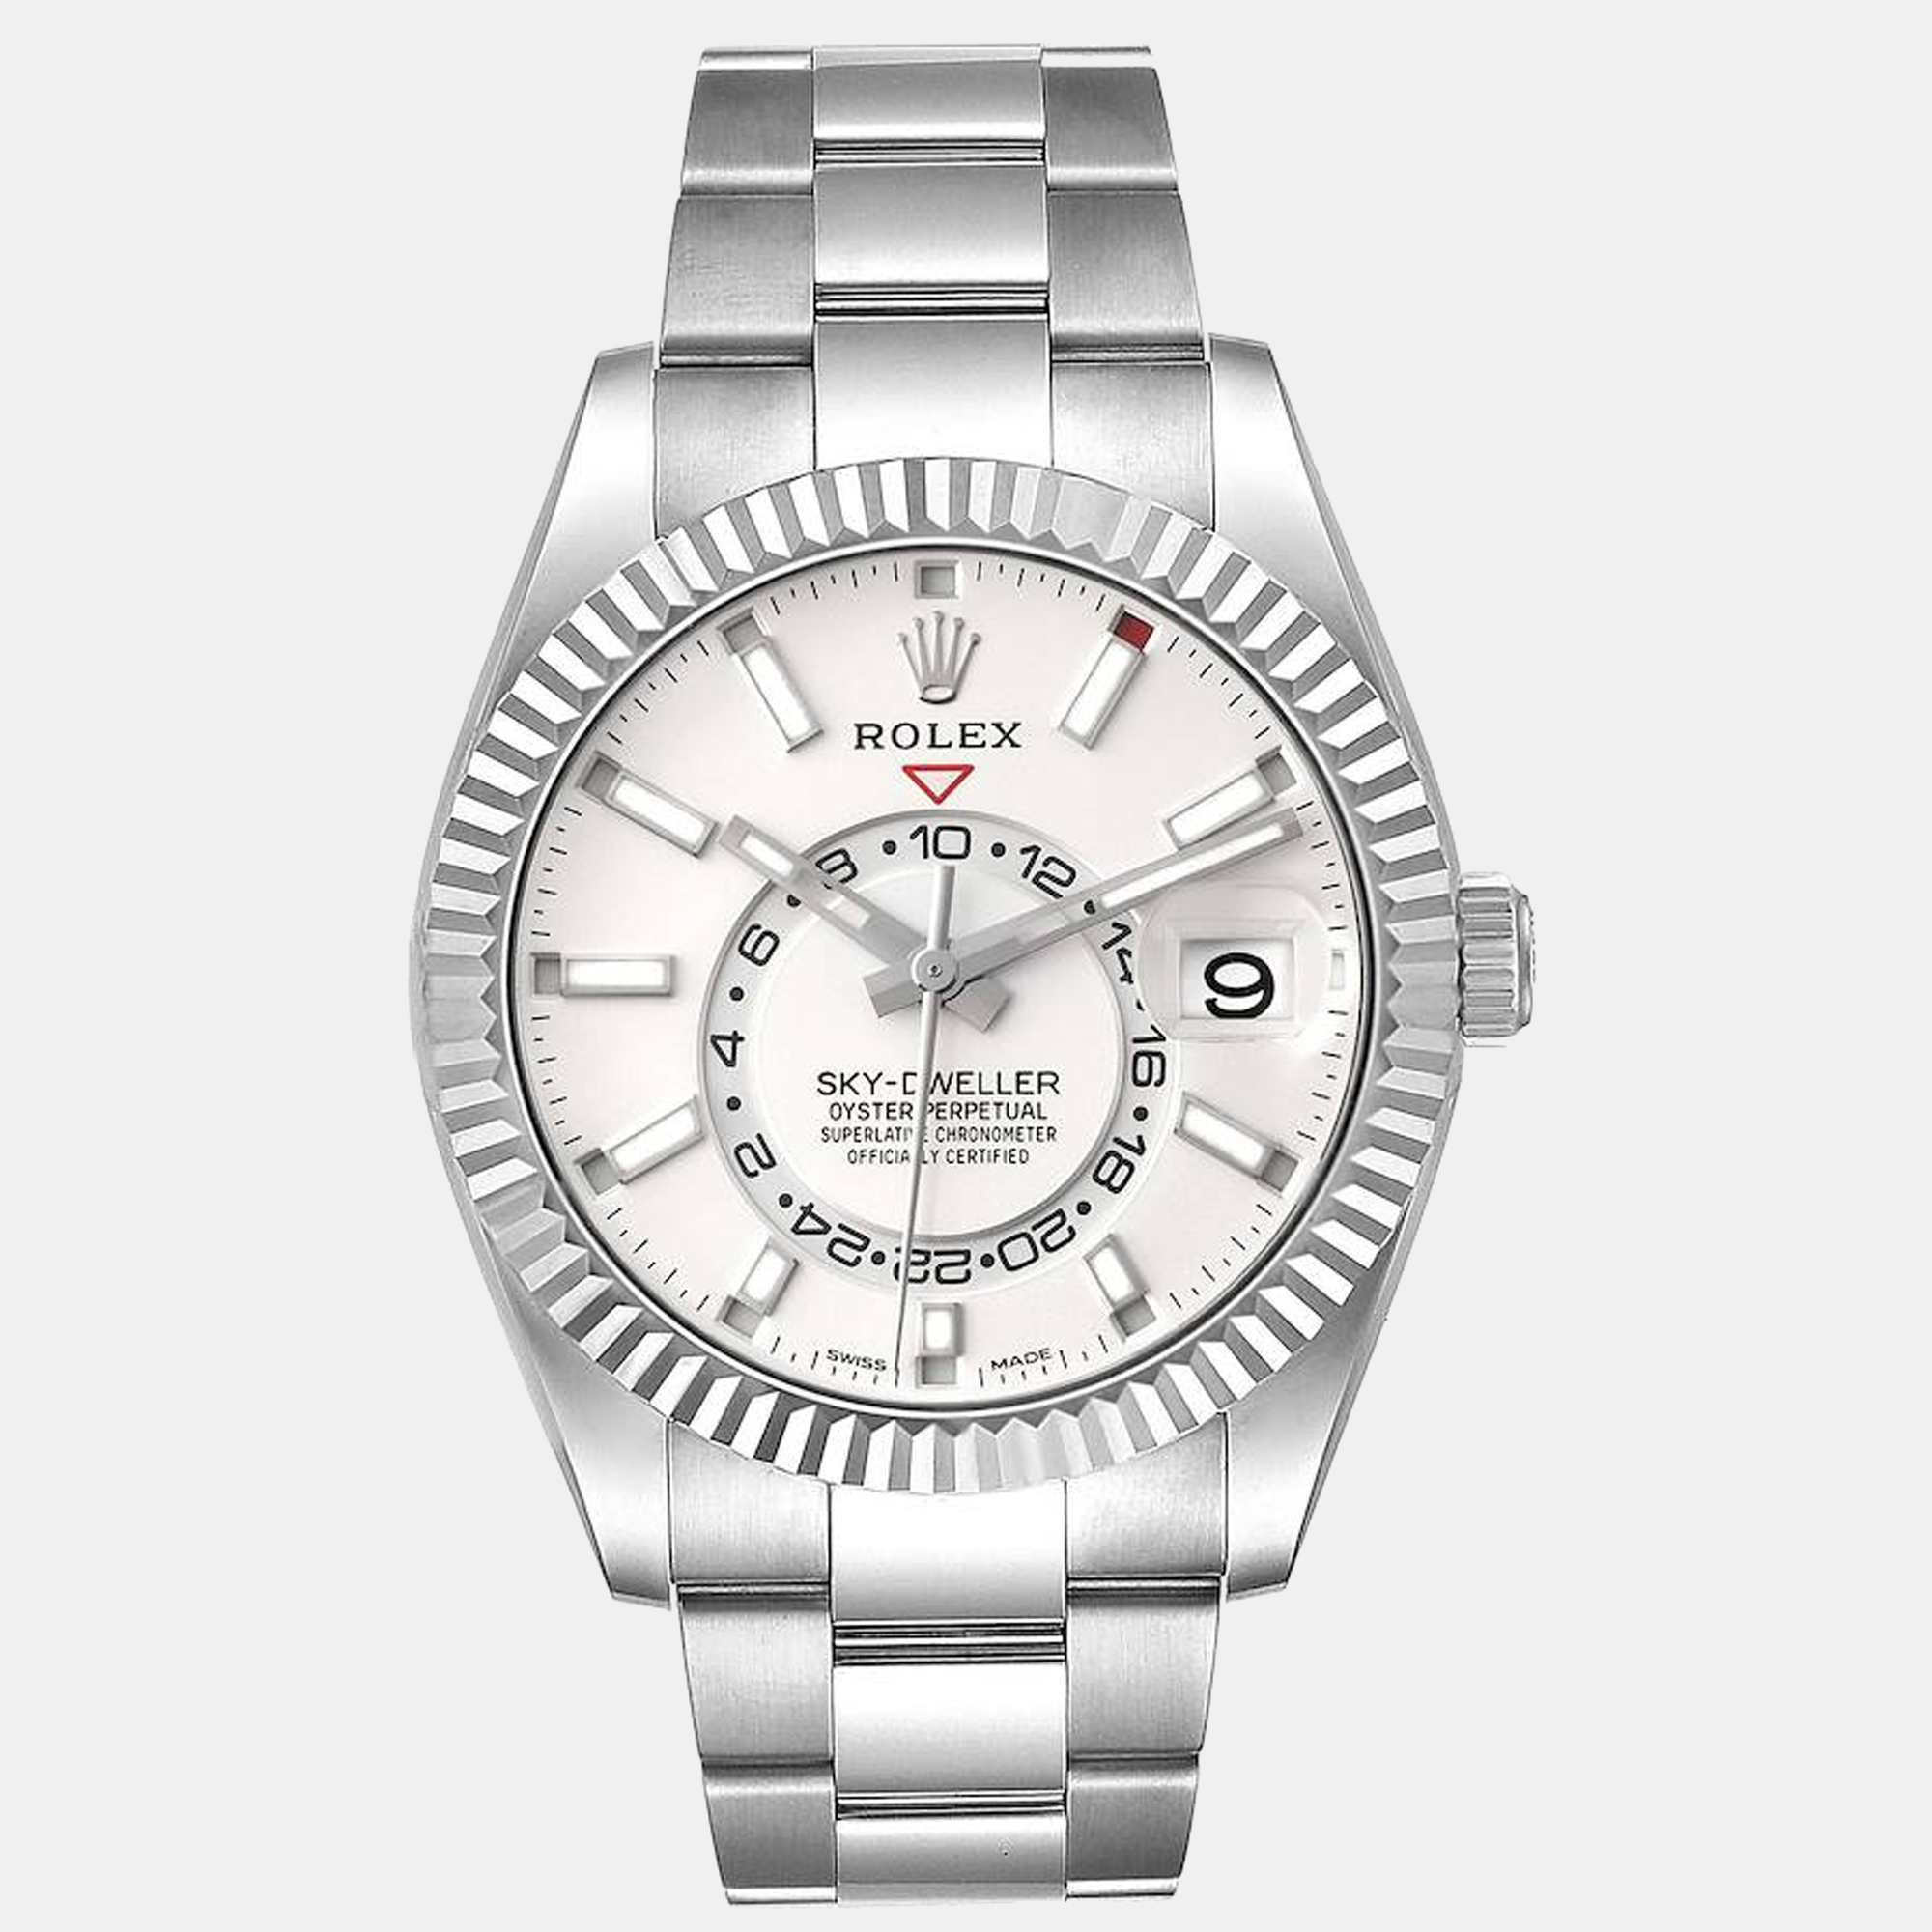 A meticulously crafted watch holds the promise of enduring appeal all day comfort and investment value. Carefully assembled and finished to stand out on your wrist this designer timepiece is a purchase you will cherish.